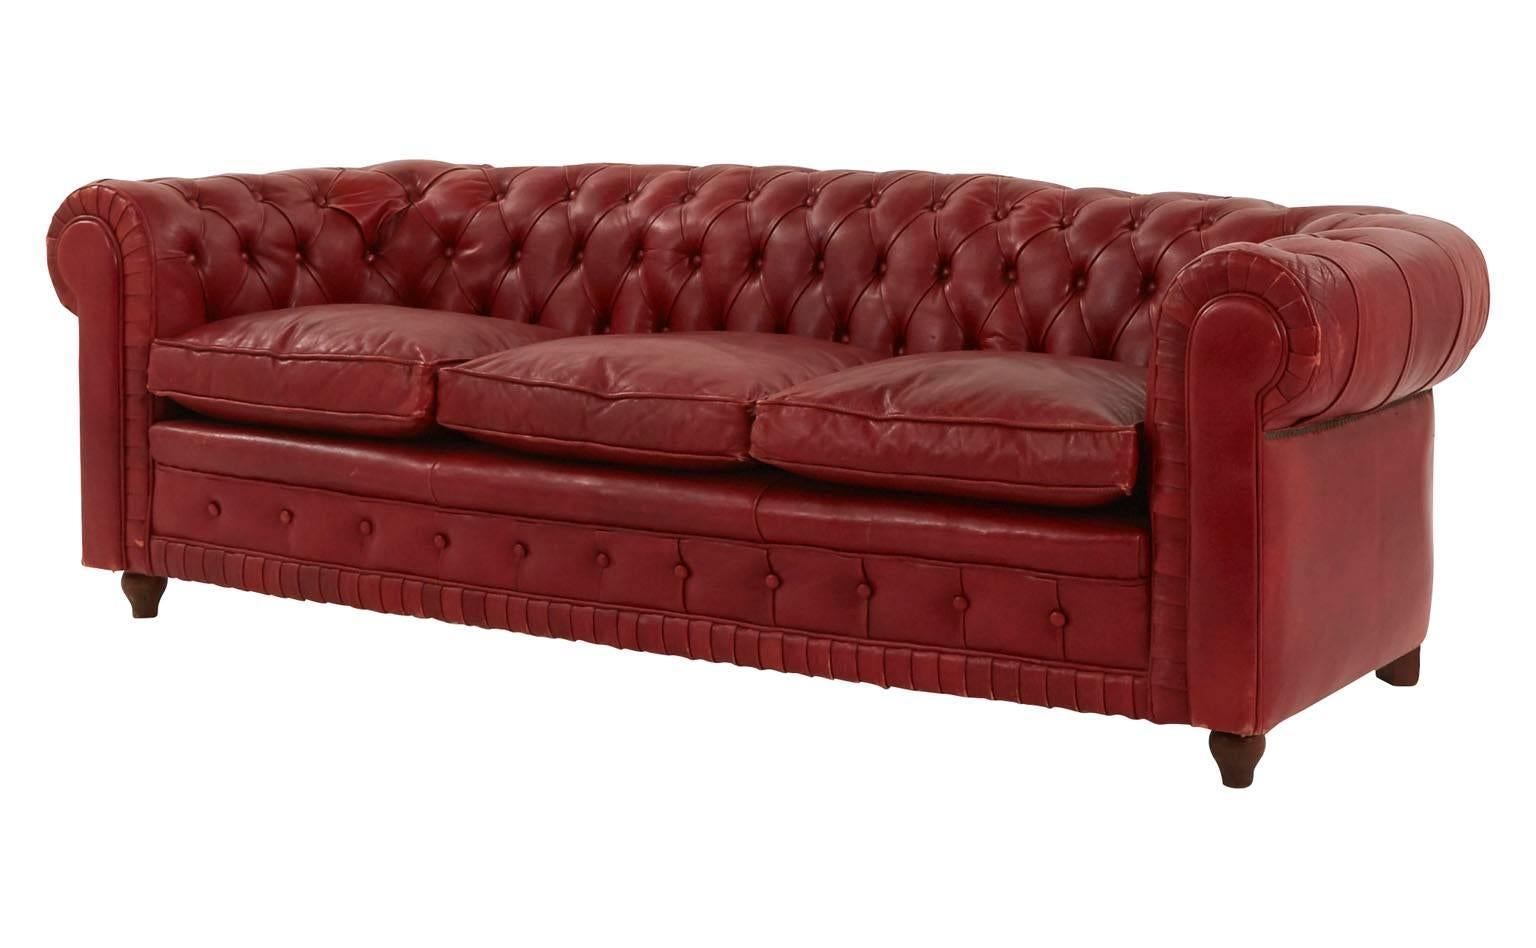 Original red leather.
Tufted Chesterfield design
Early 20th Century
France

Dimensions:
Overall: 75'W x 31'D x 26'H
Seat: 62'W x 21'D x 18.5'H